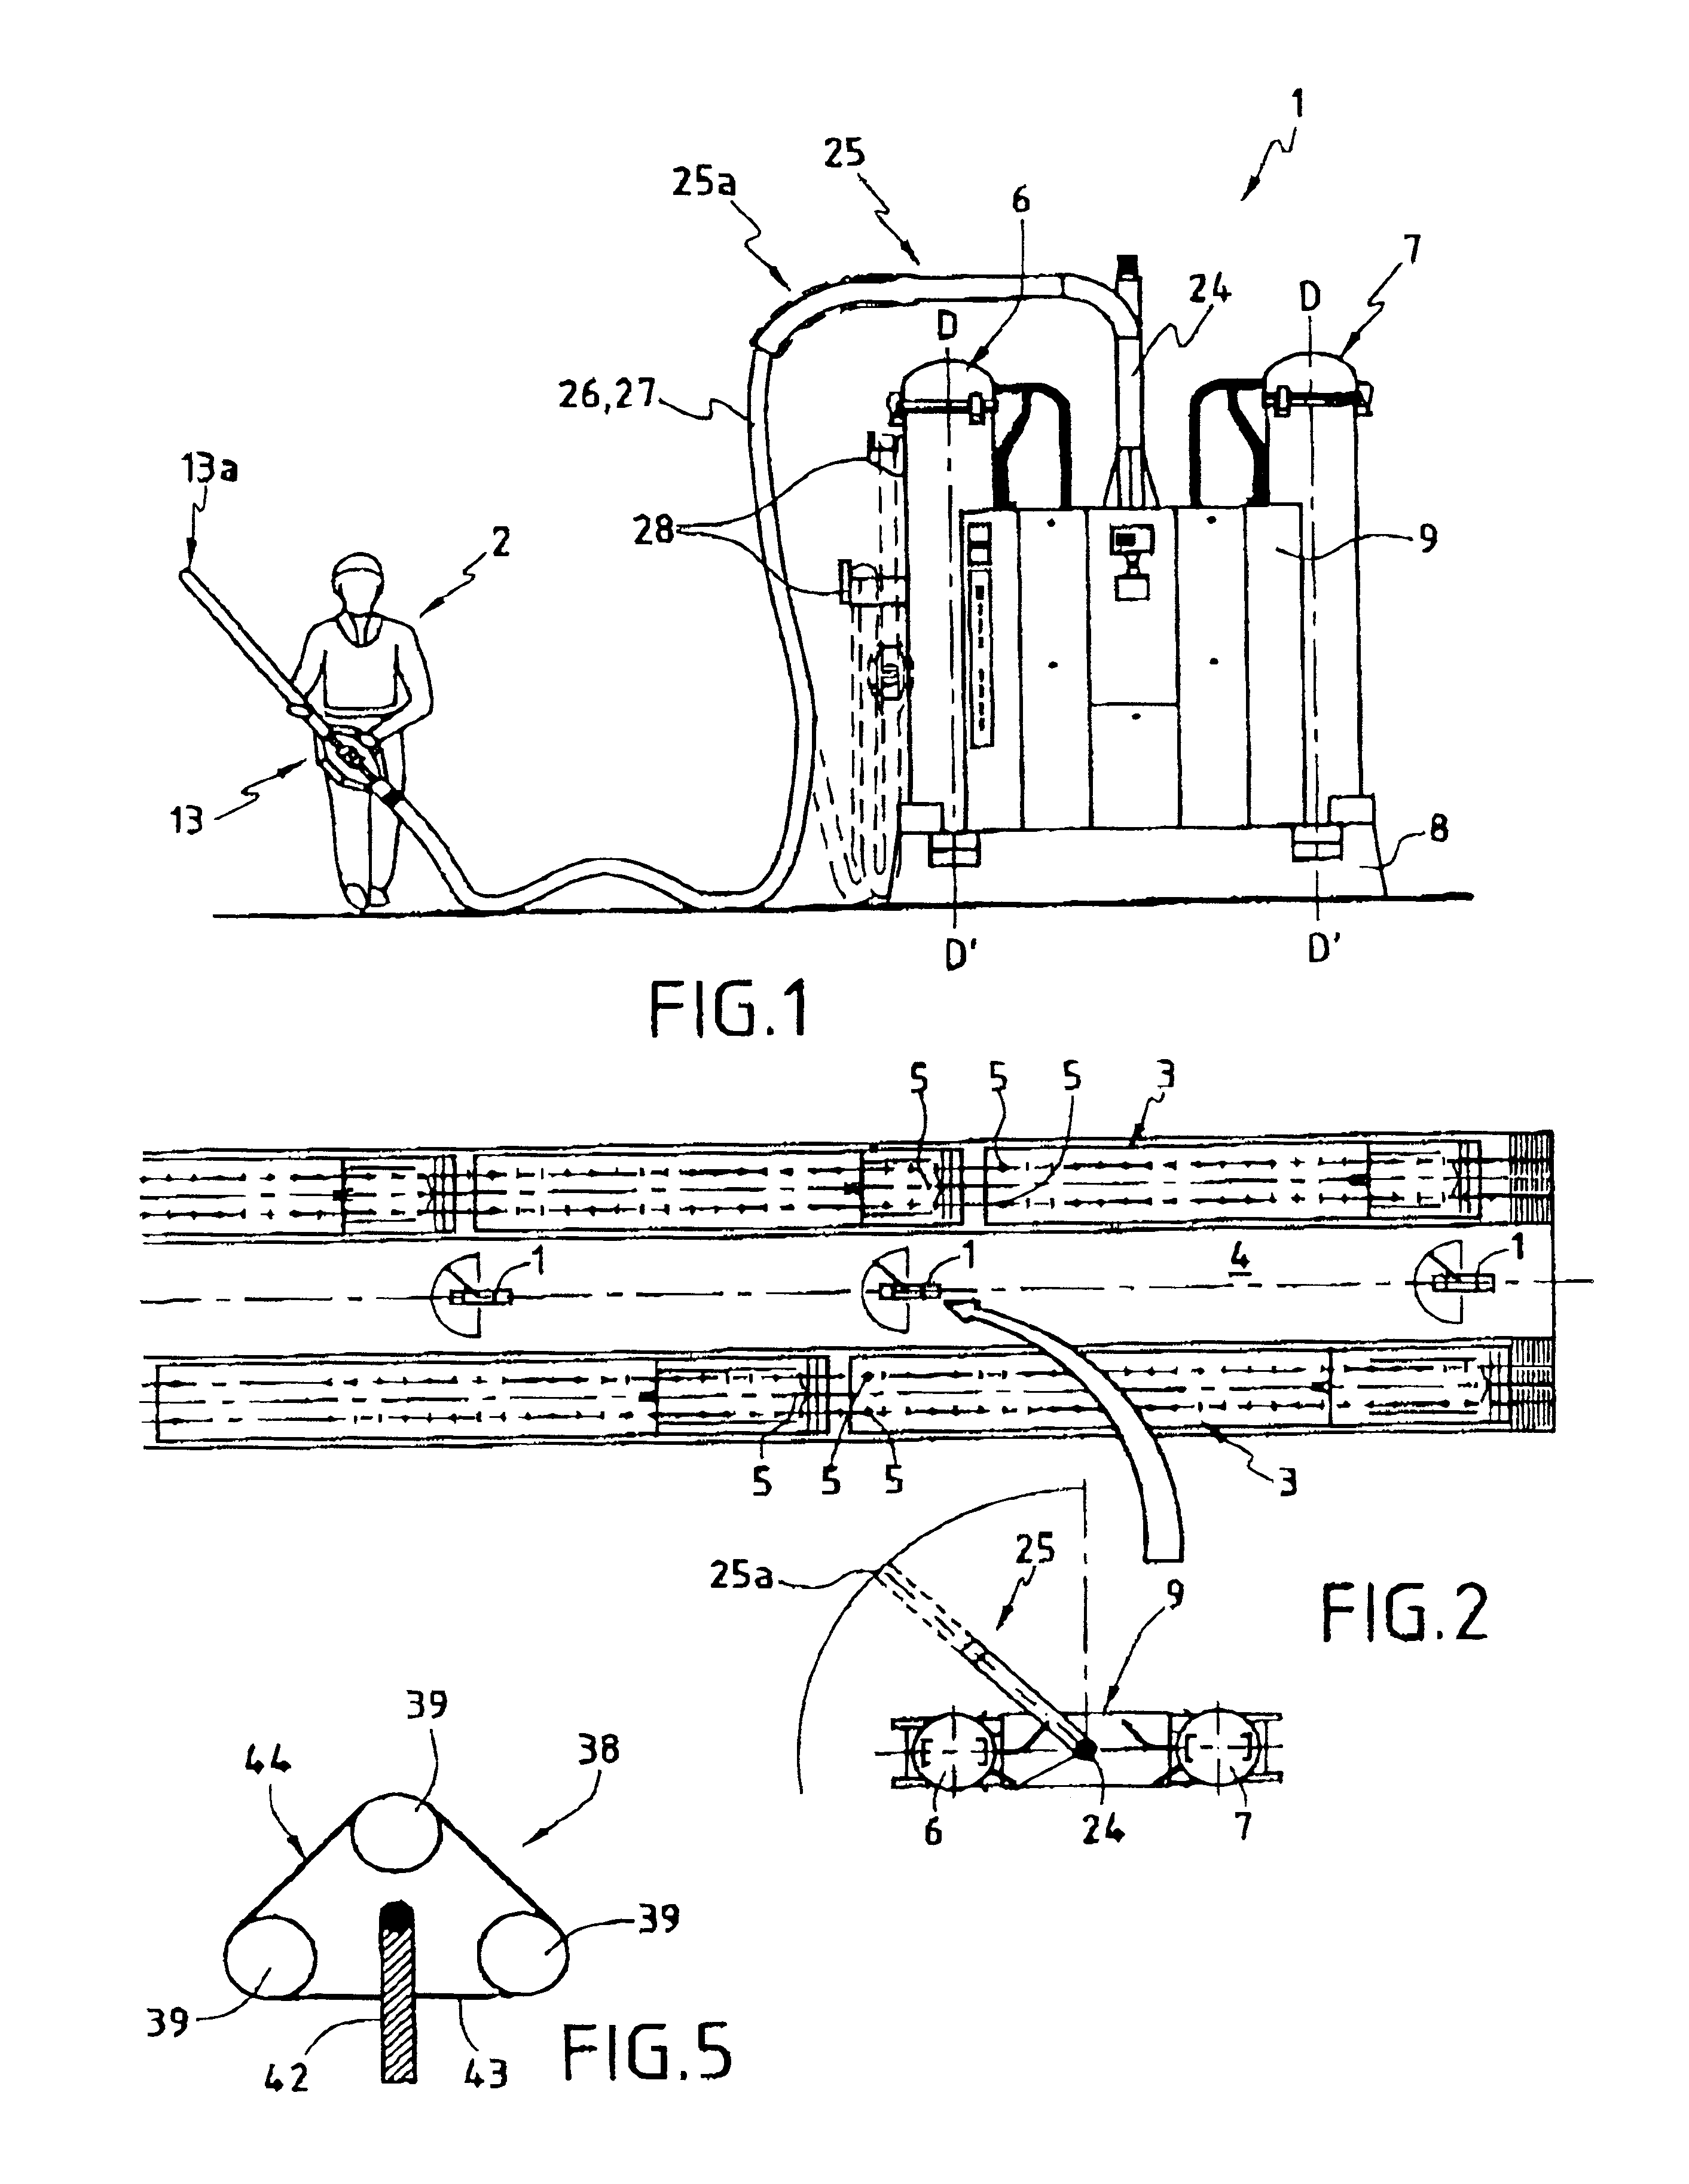 Granular material distributing apparatus comprising at least two transfer vessels that operate in alternation